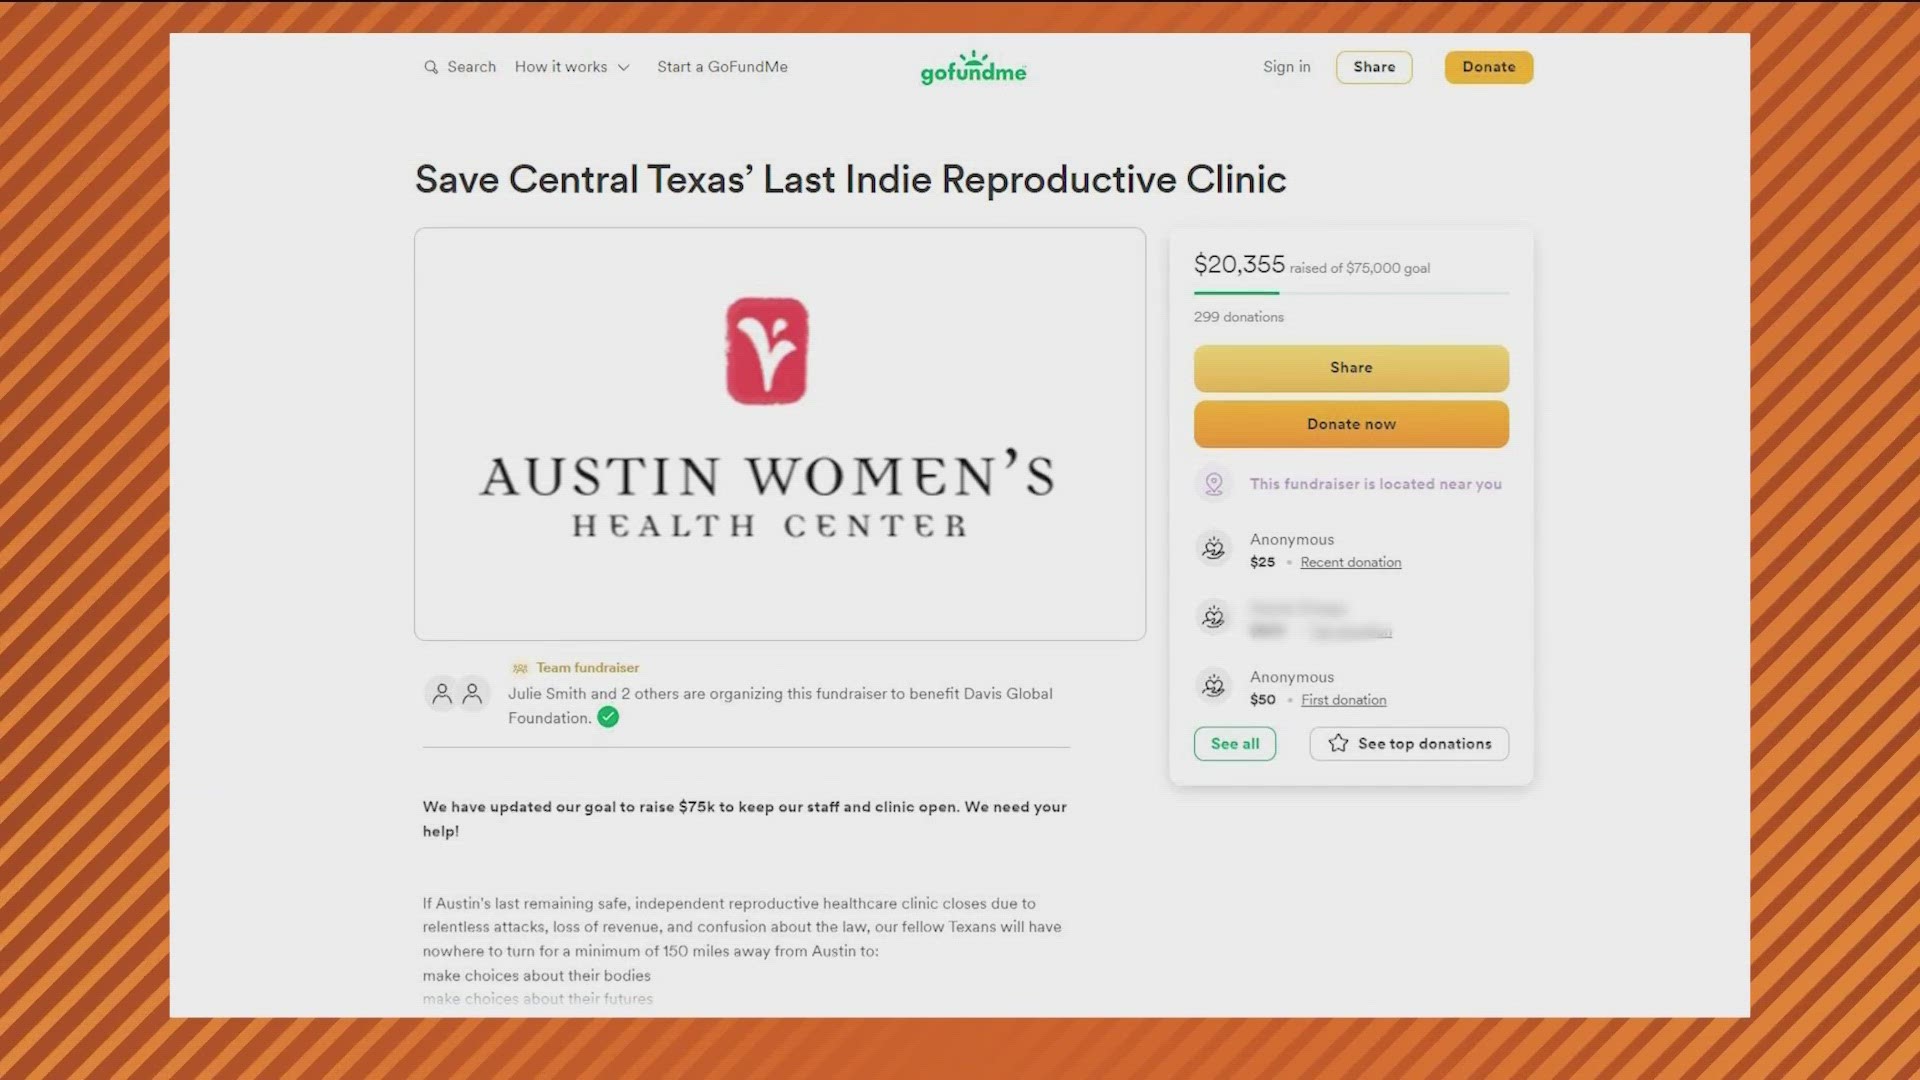 The Austin Women's Health Center is struggling to stay open after almost 50 years of service to the community.